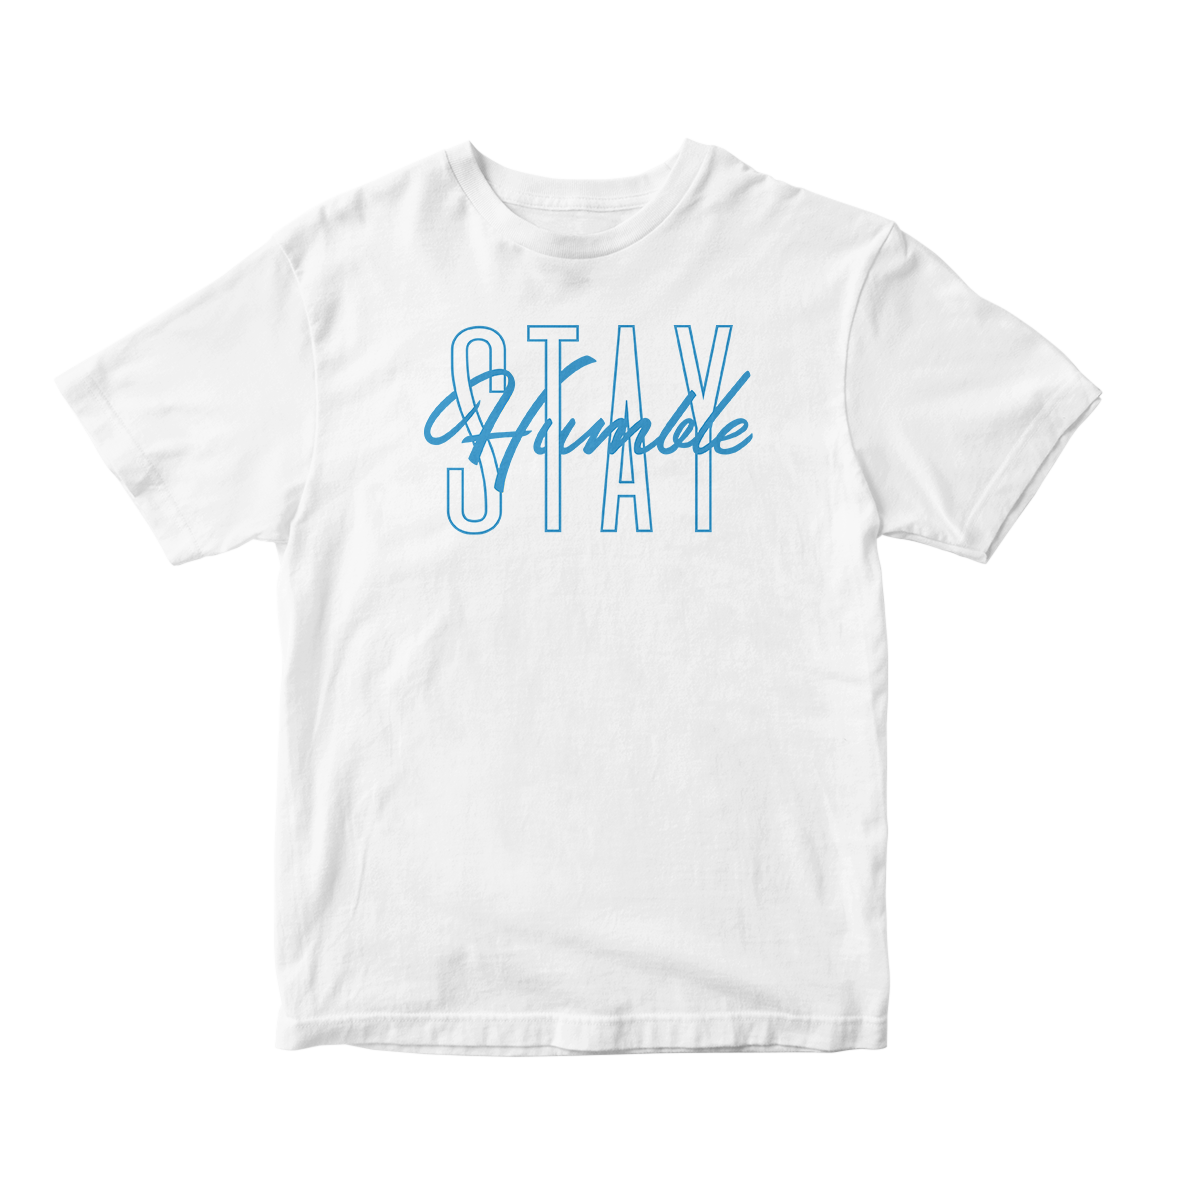 'Stay Humble' in Powder Blue CW Short Sleeve Tee